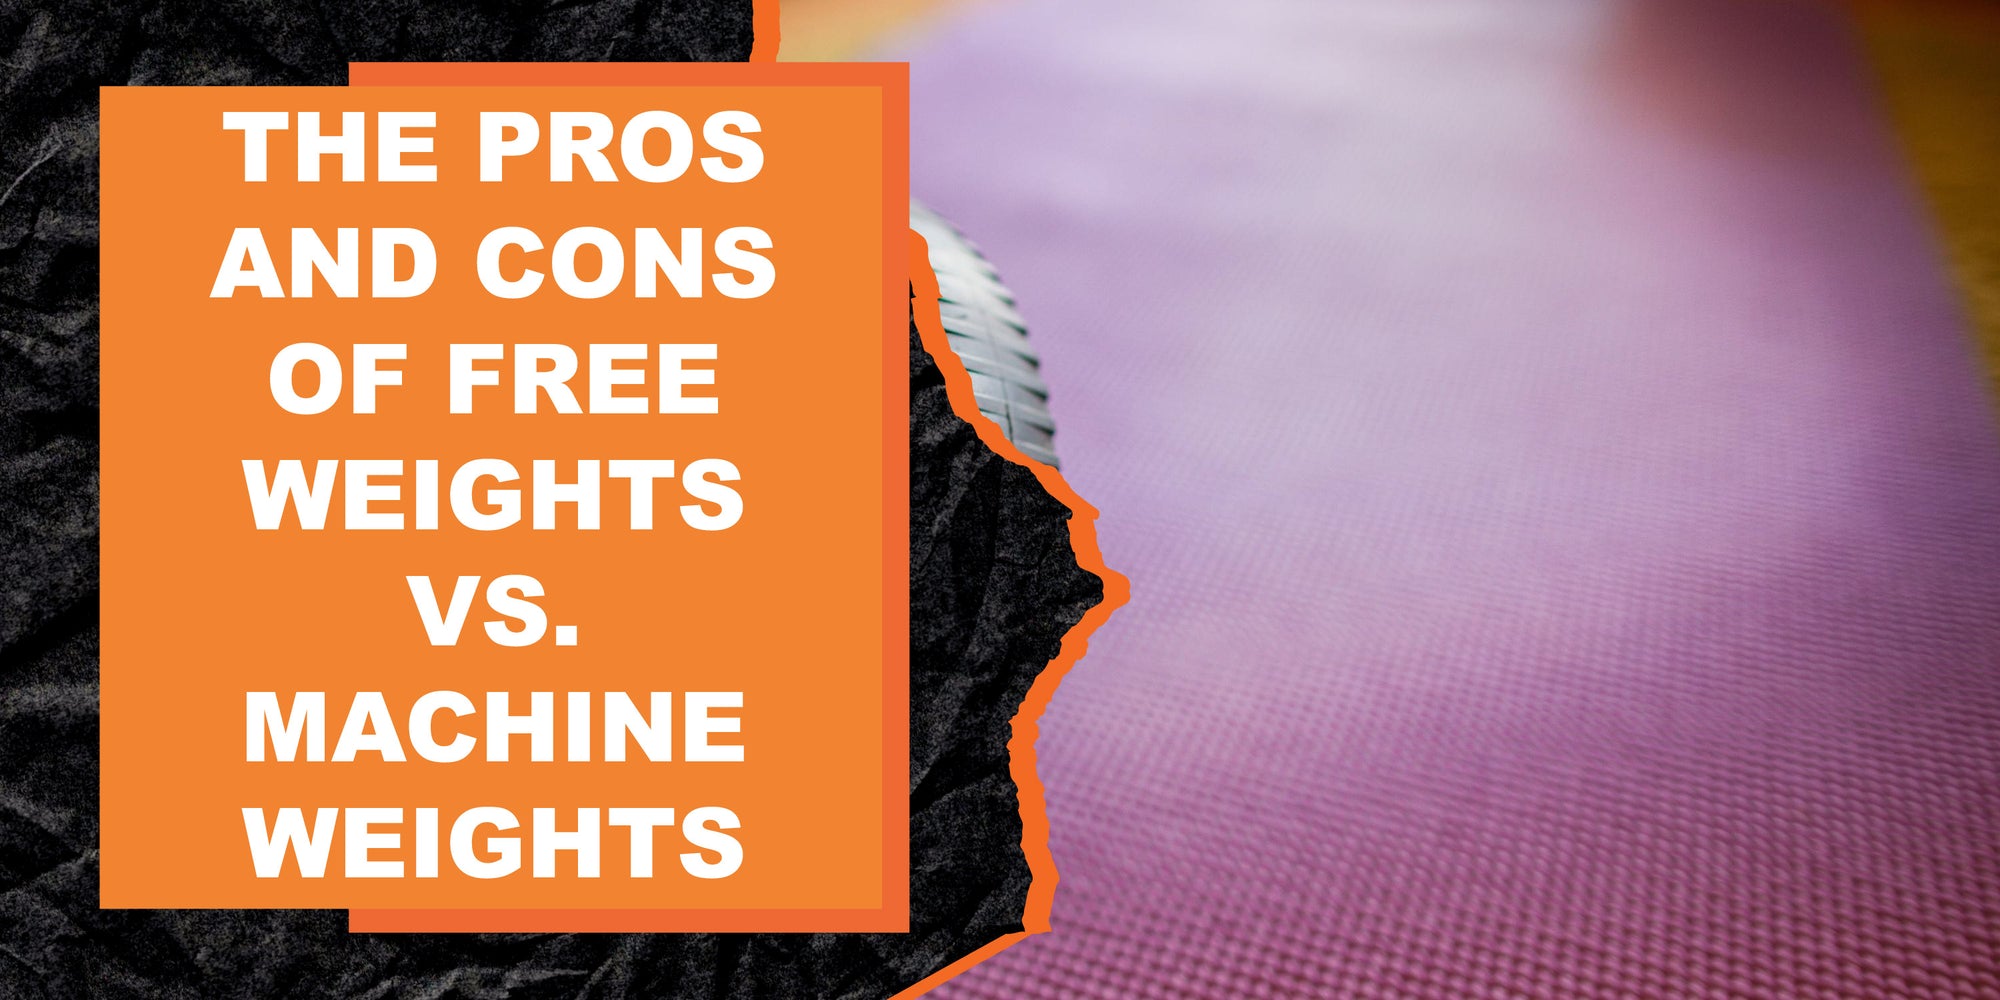 The Pros and Cons of Free Weights vs. Machine Weights